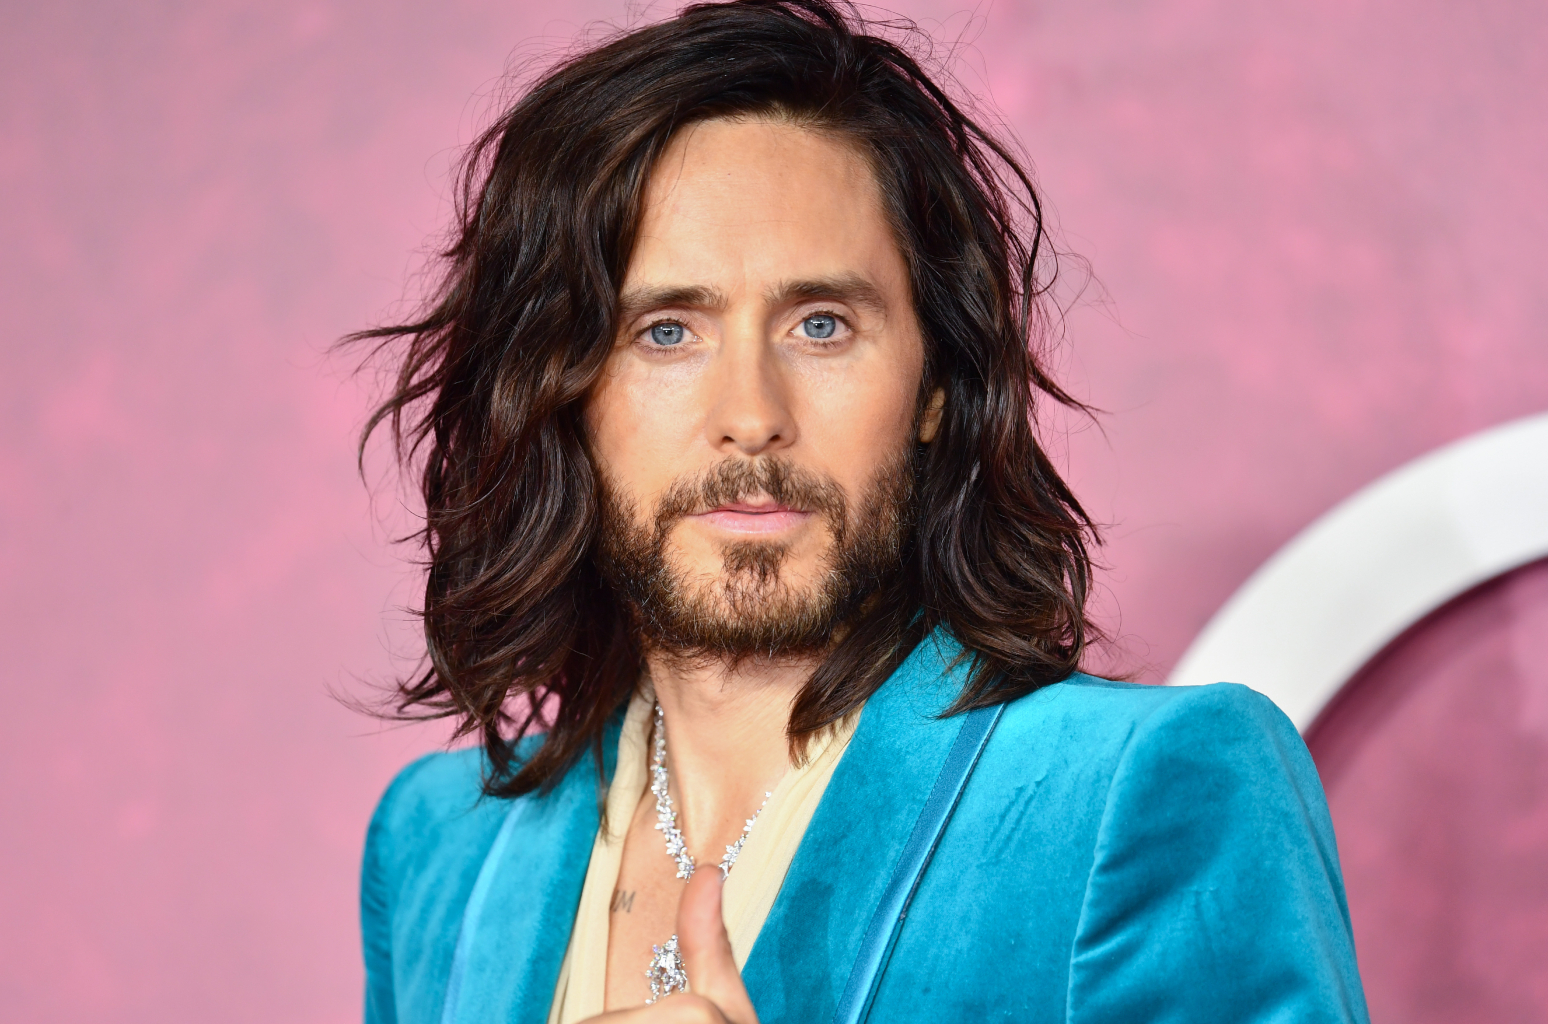 Jared Leto is the god**n worst.